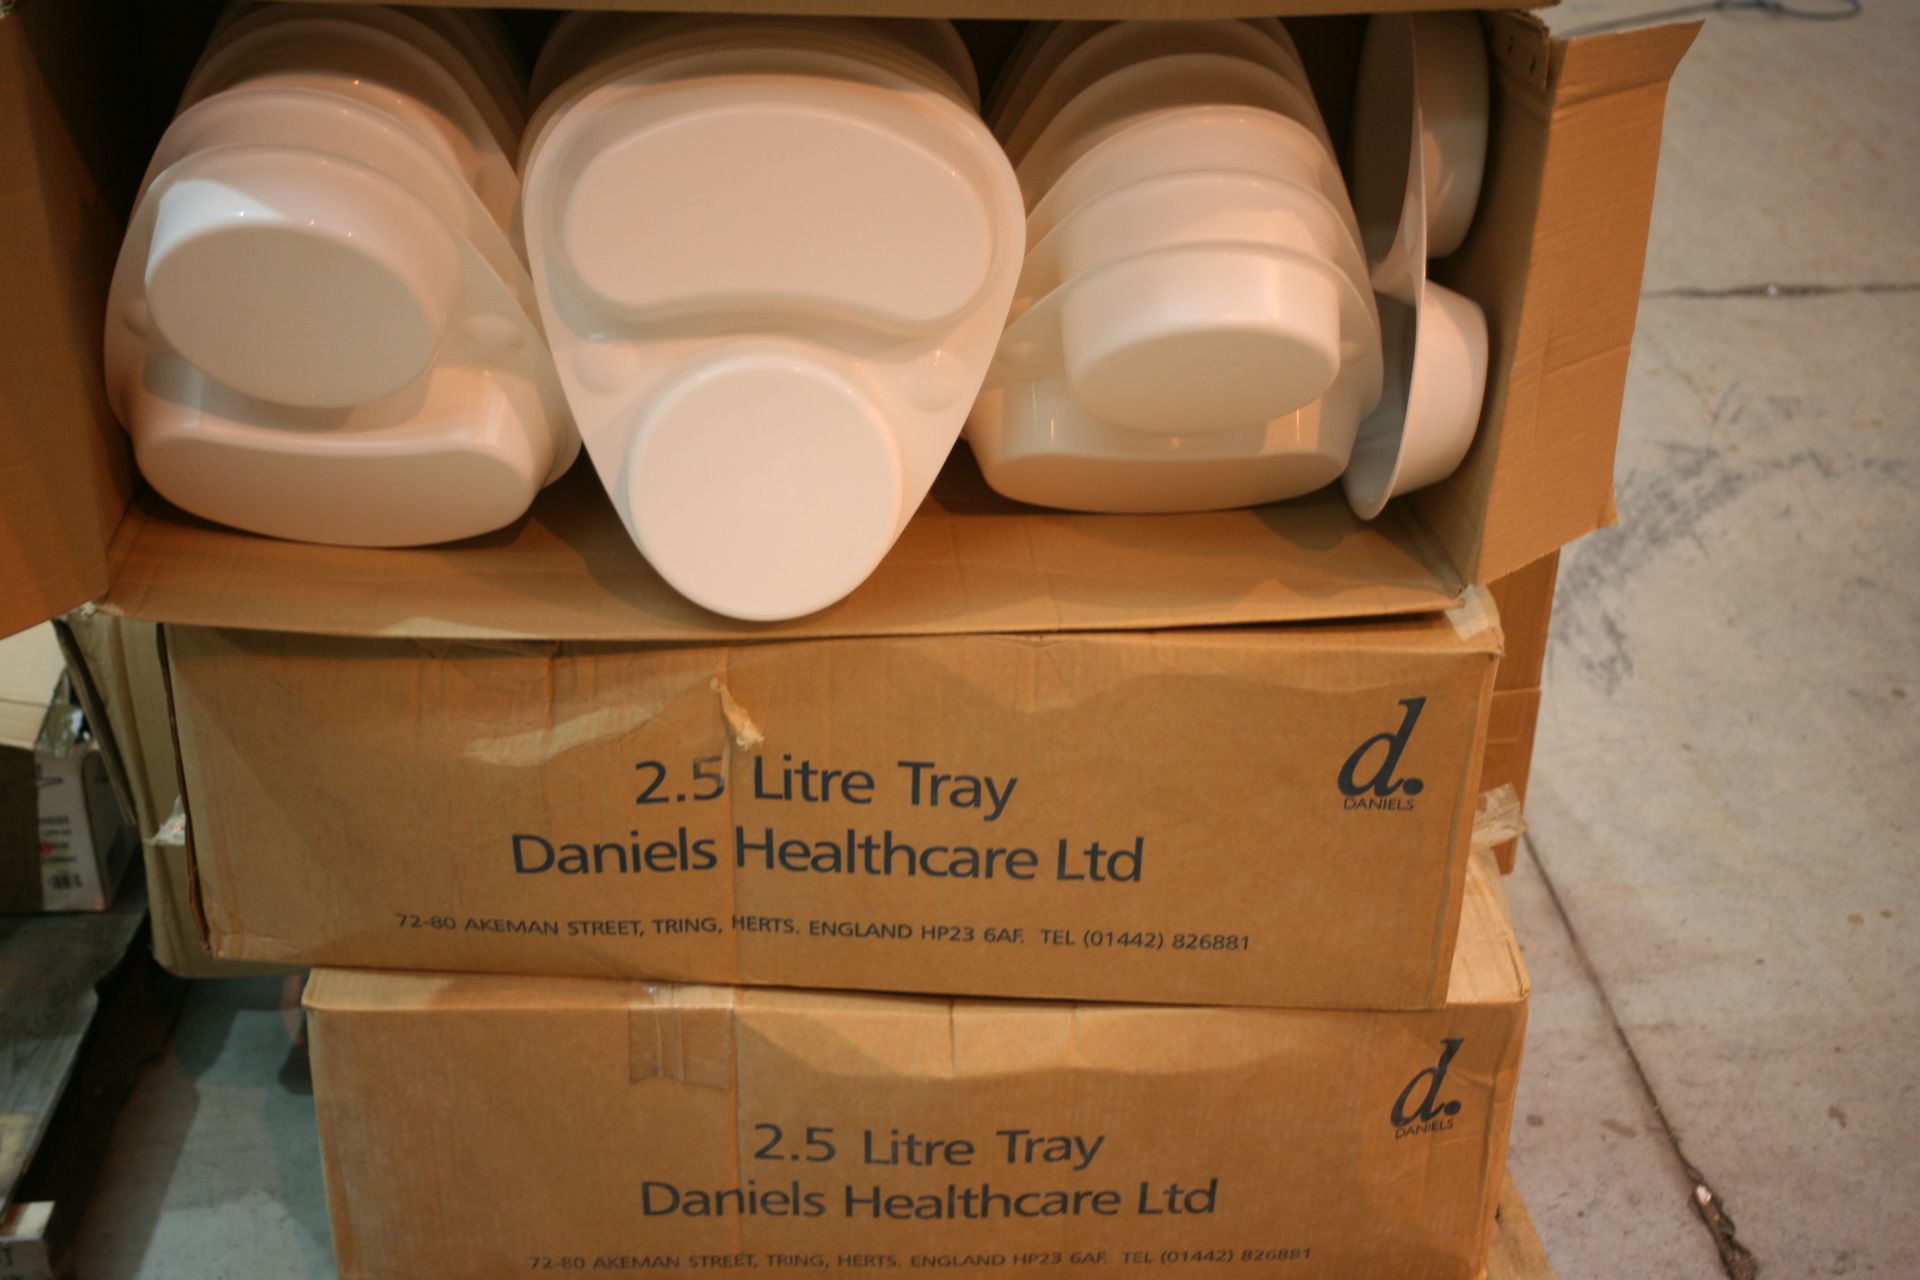 3x Boxes Of Daniels Healthcare 2.